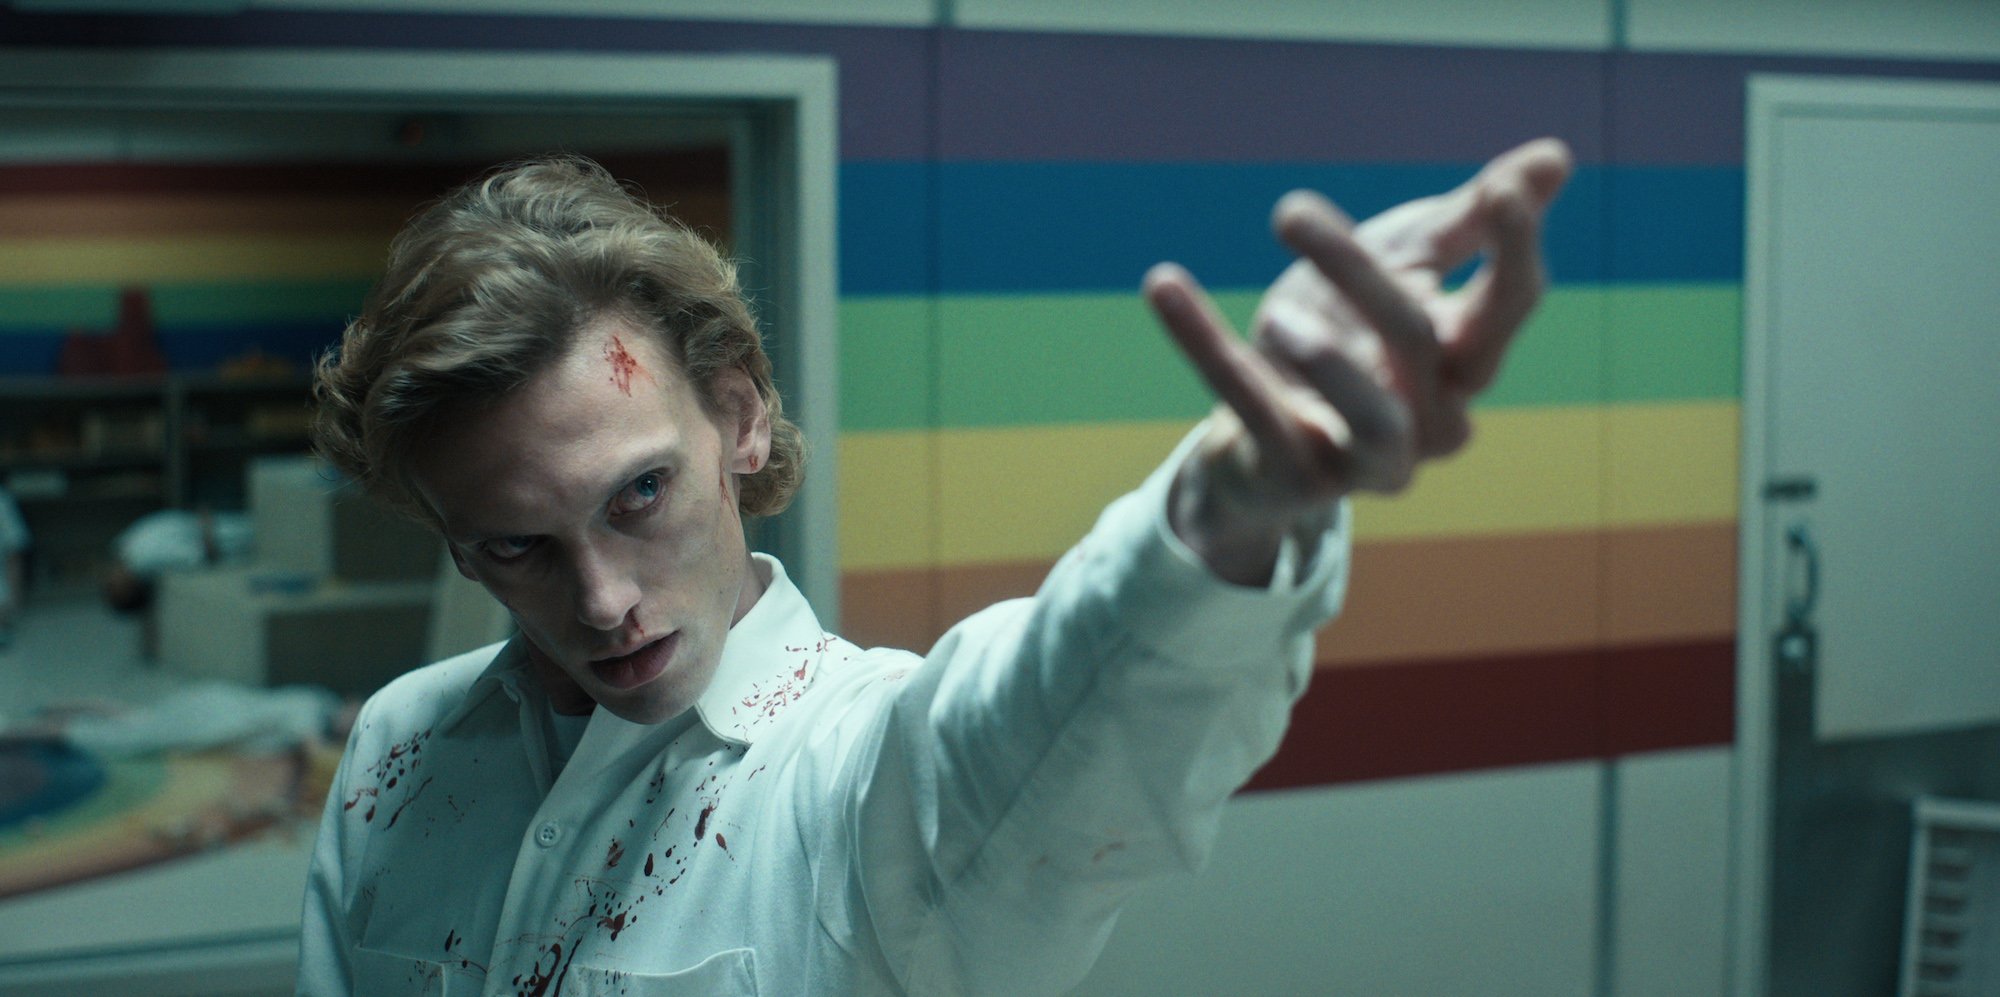 Jamie Campbell Bower as Peter Ballard in the Rainbow Room at Hawkins National Lab. Jamie Campbell Bower believes Henry Creel was born with his powers.